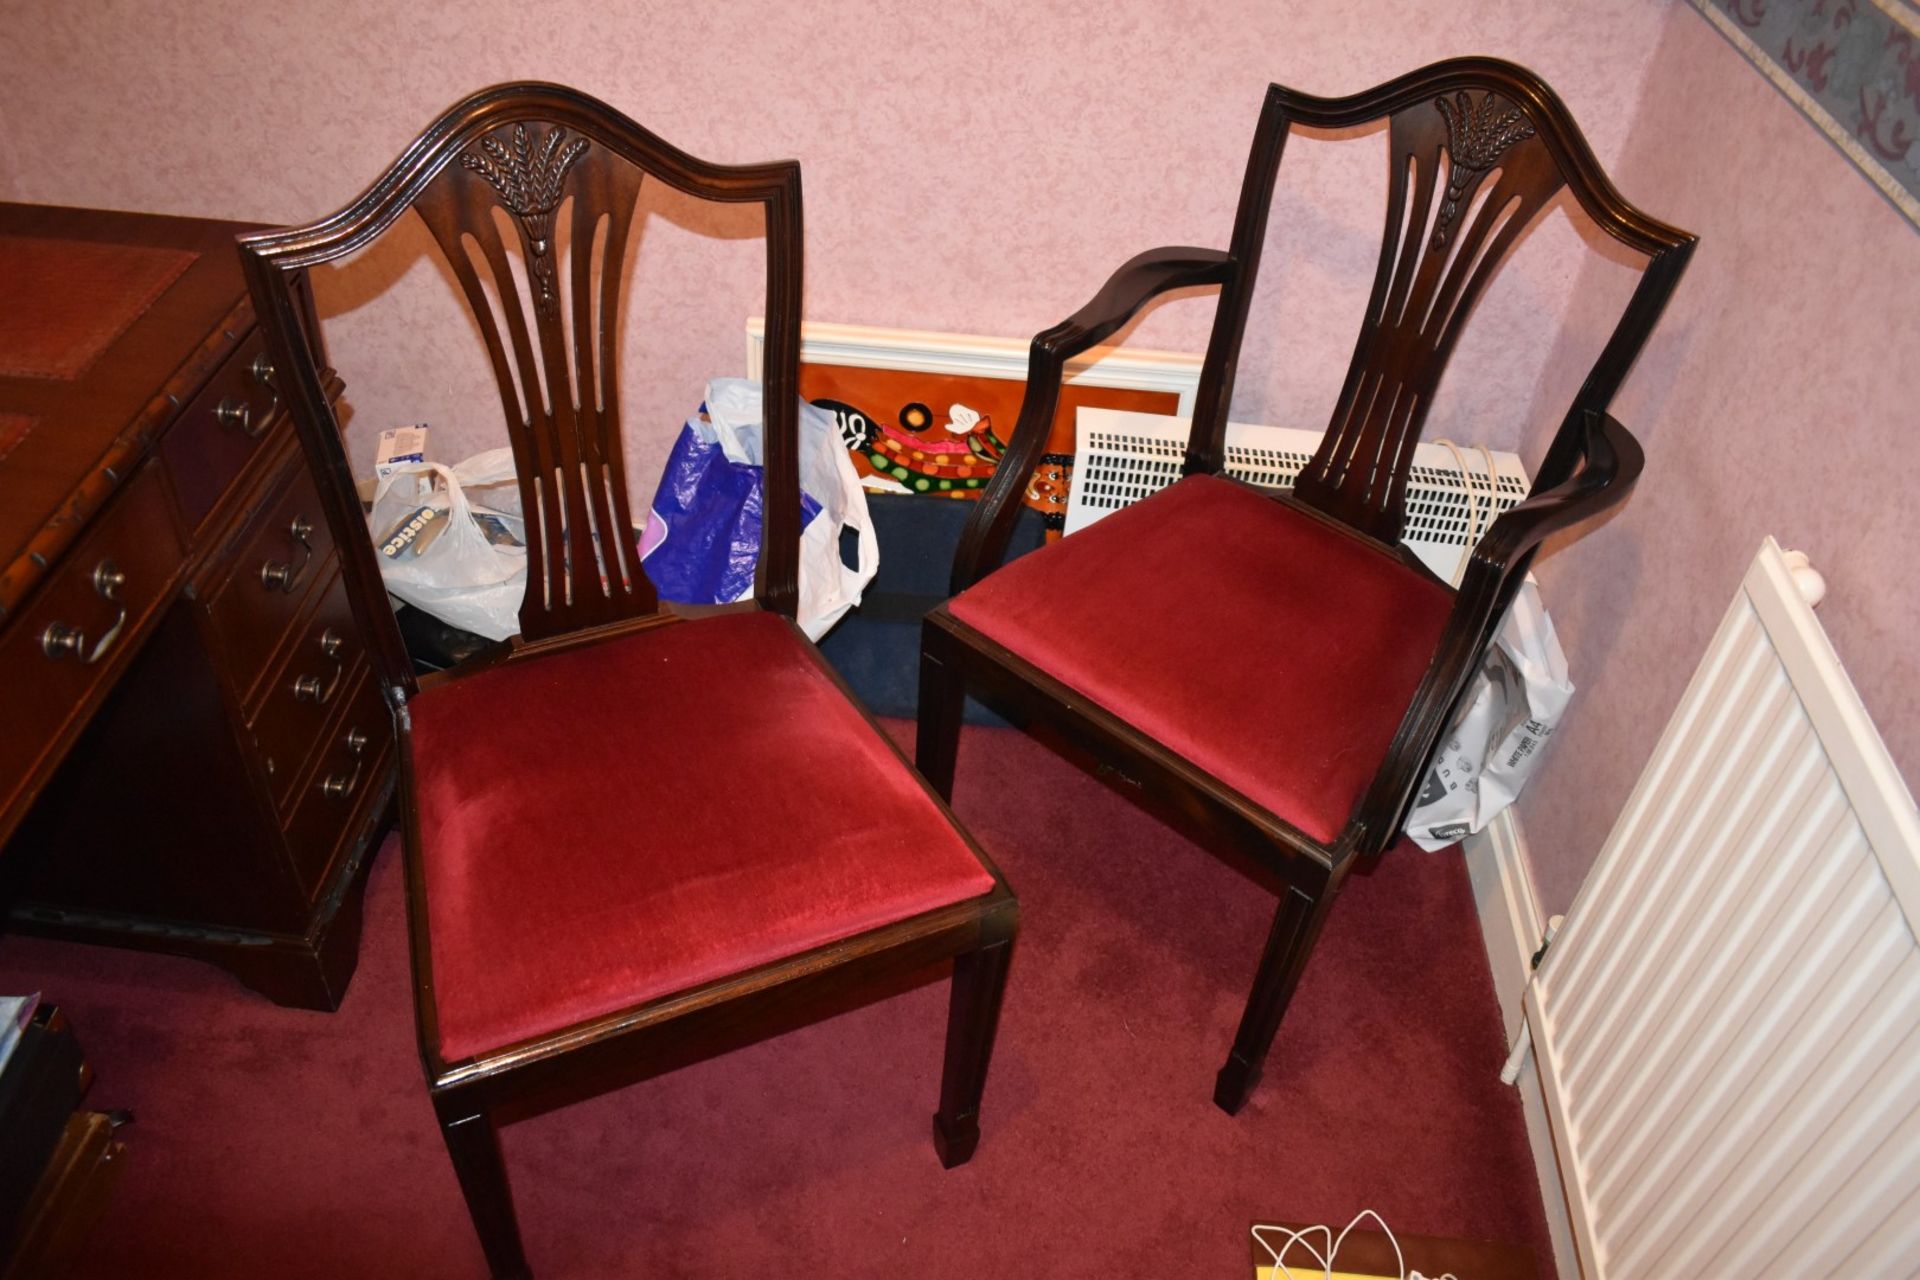 2 x Mahogany Shieldback Dining Chairs With Cushioned Seats Upholstered in Red Fabric - CL579 - No - Image 3 of 4